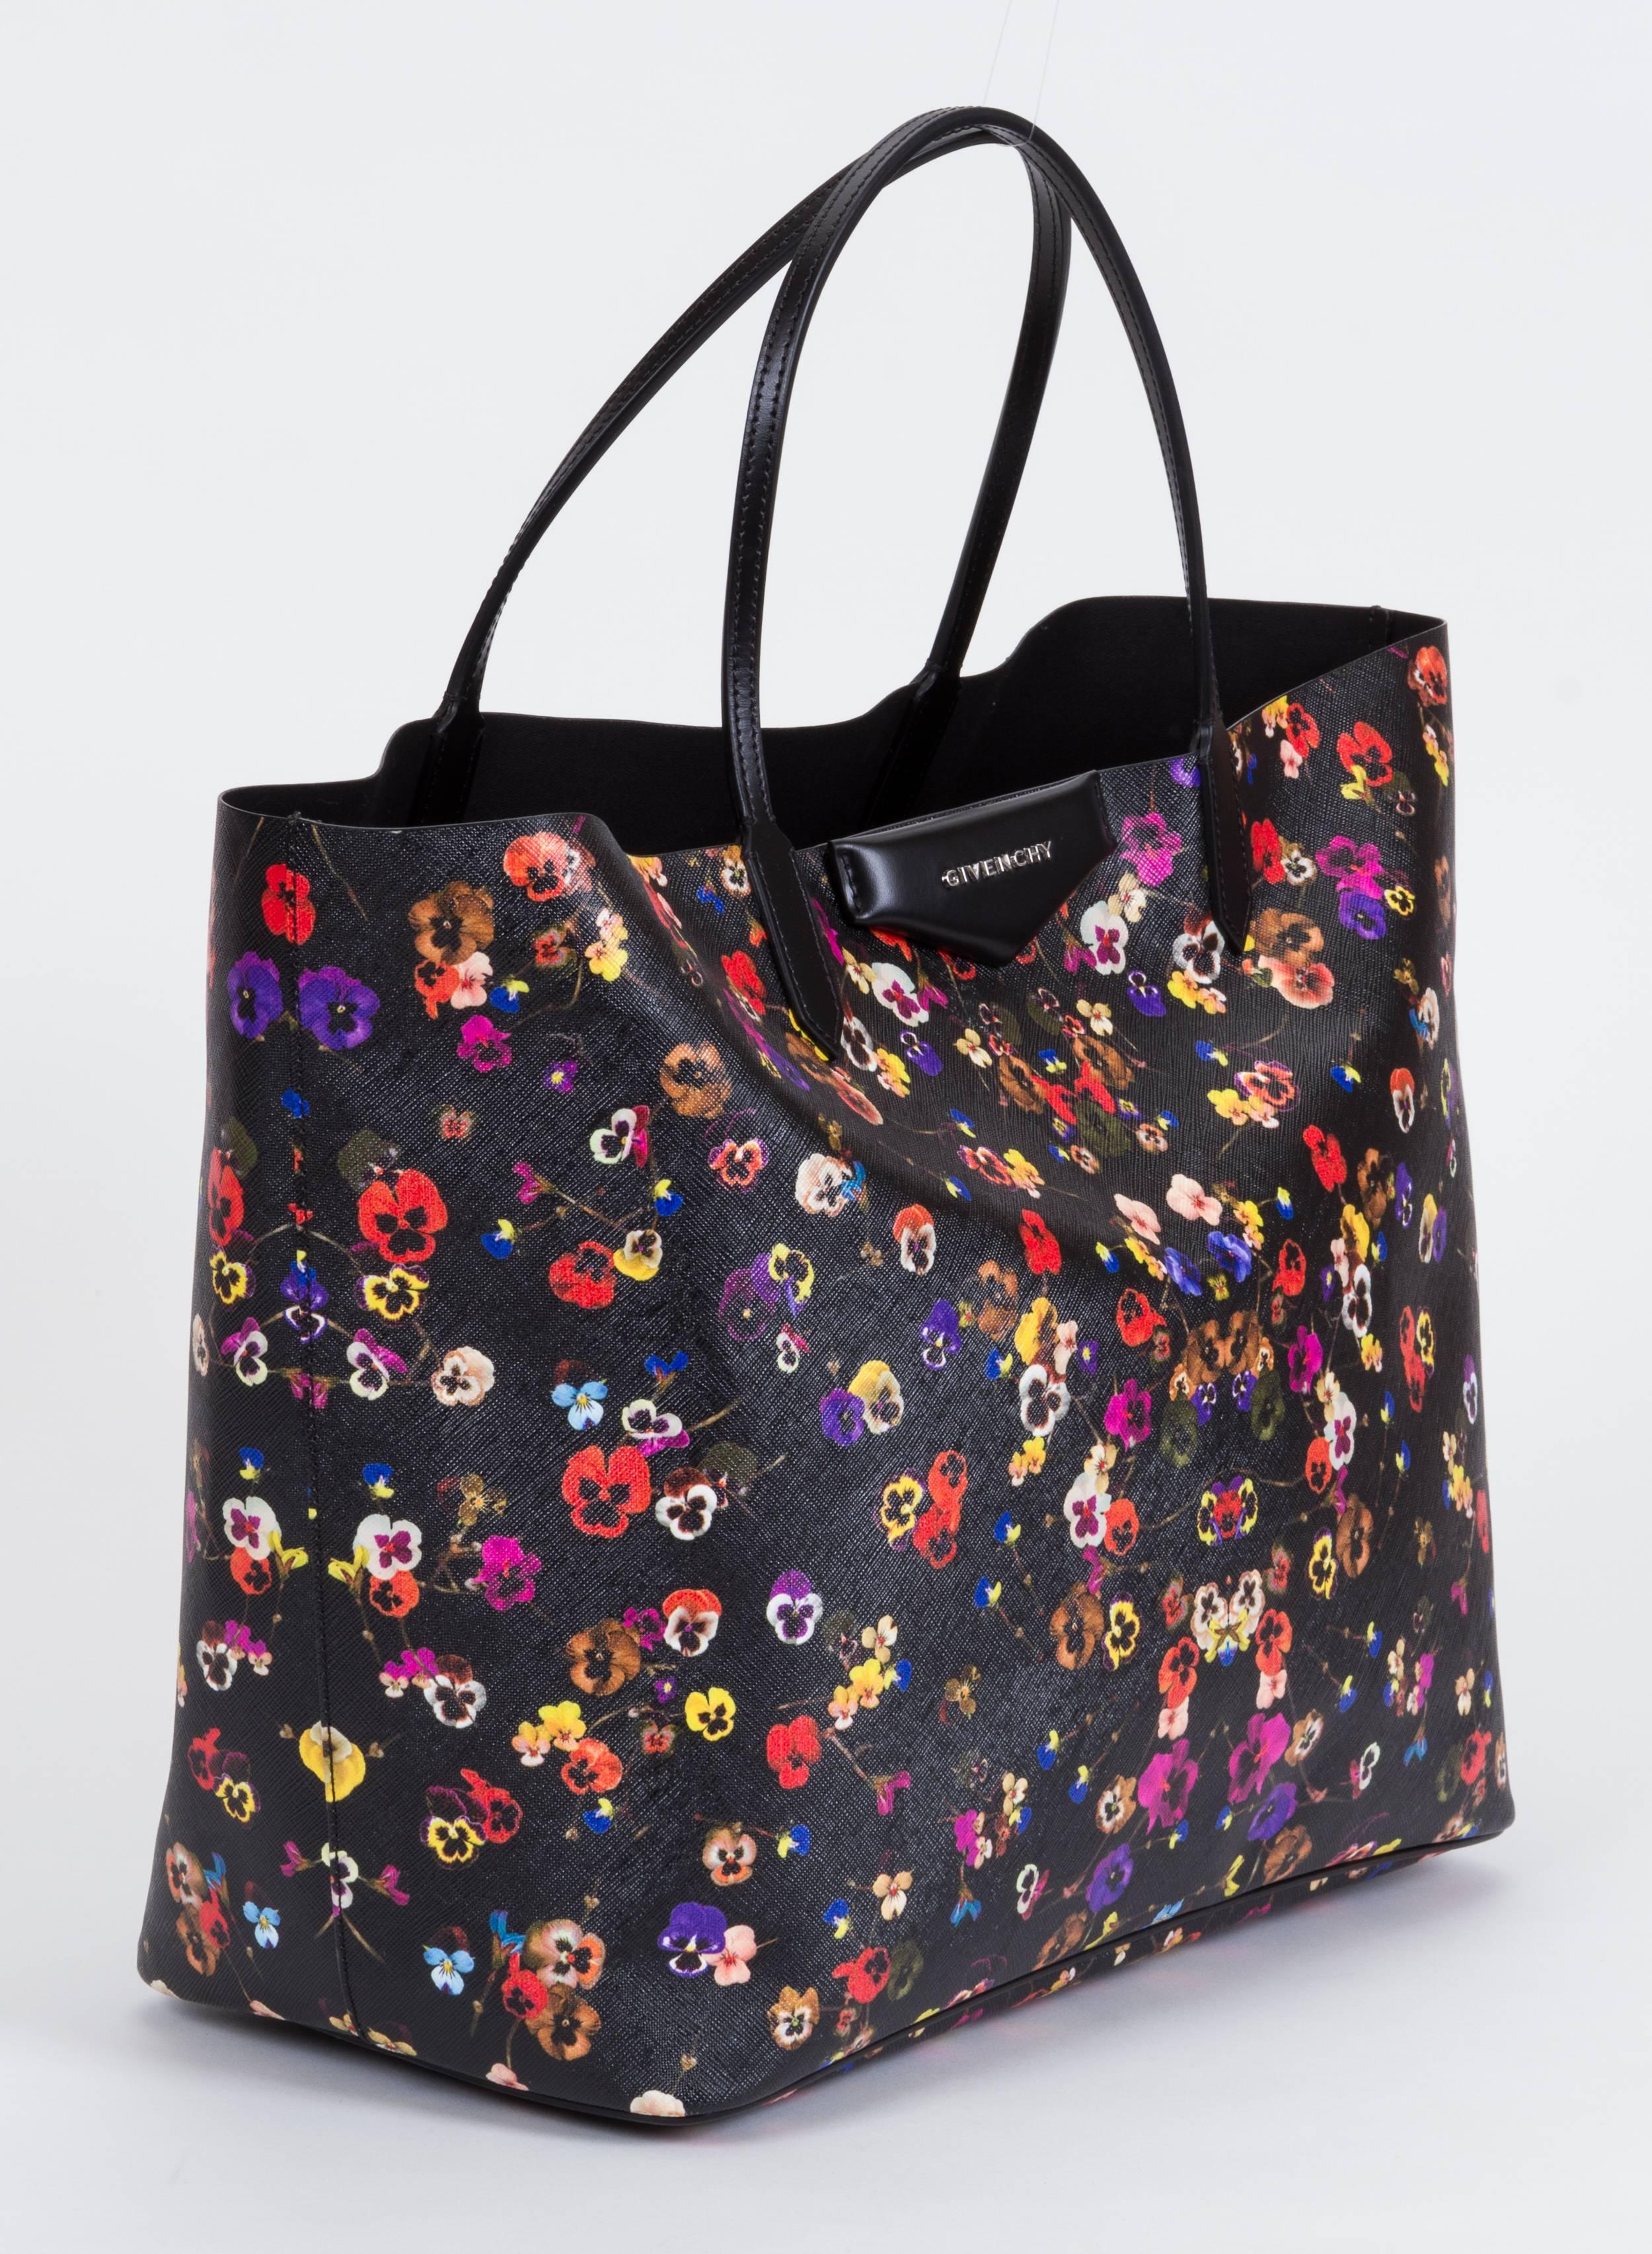 Givenchy brand new large flower antigona shopper. Saffiano leather imitation with multicolor flower pattern. Handle drop 7